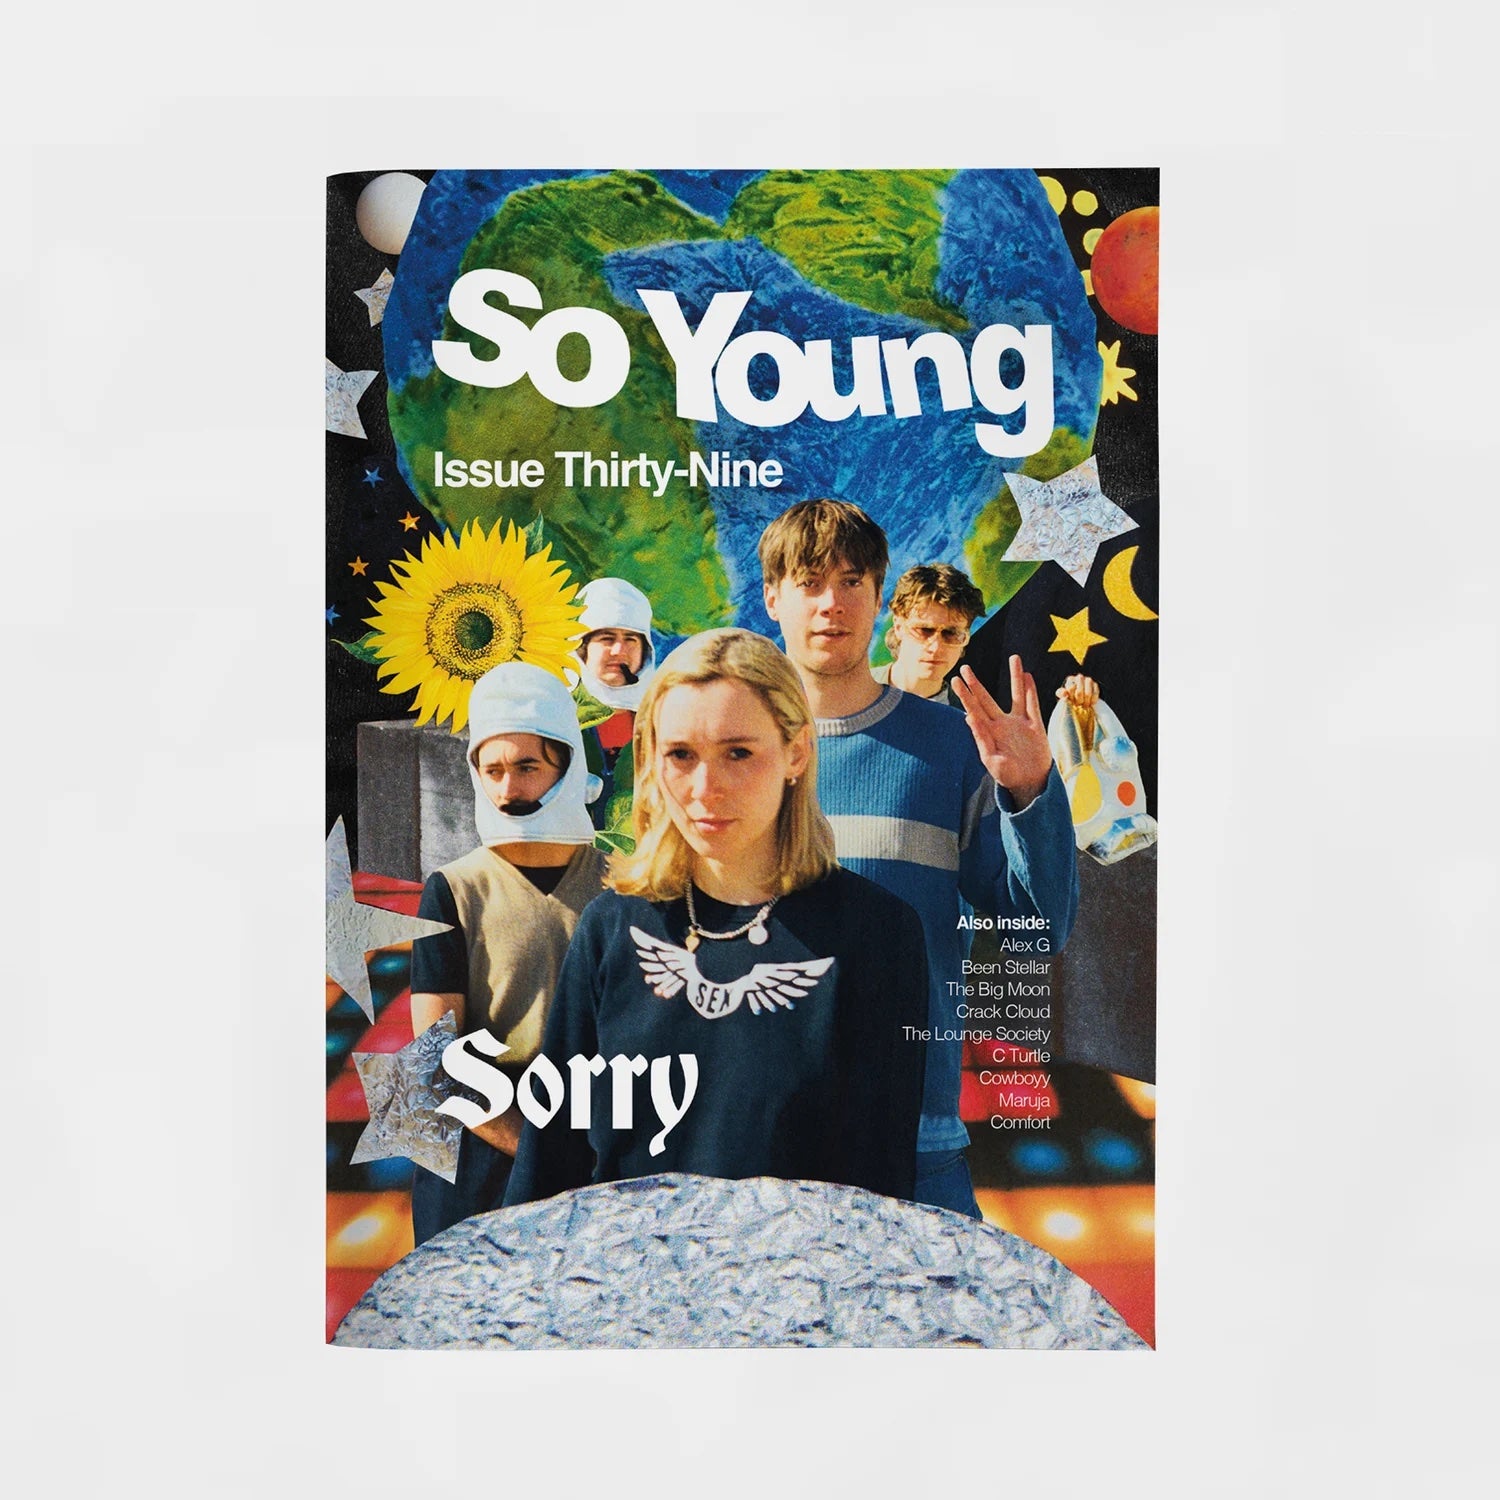 So Young - Issue Thirty-Nine